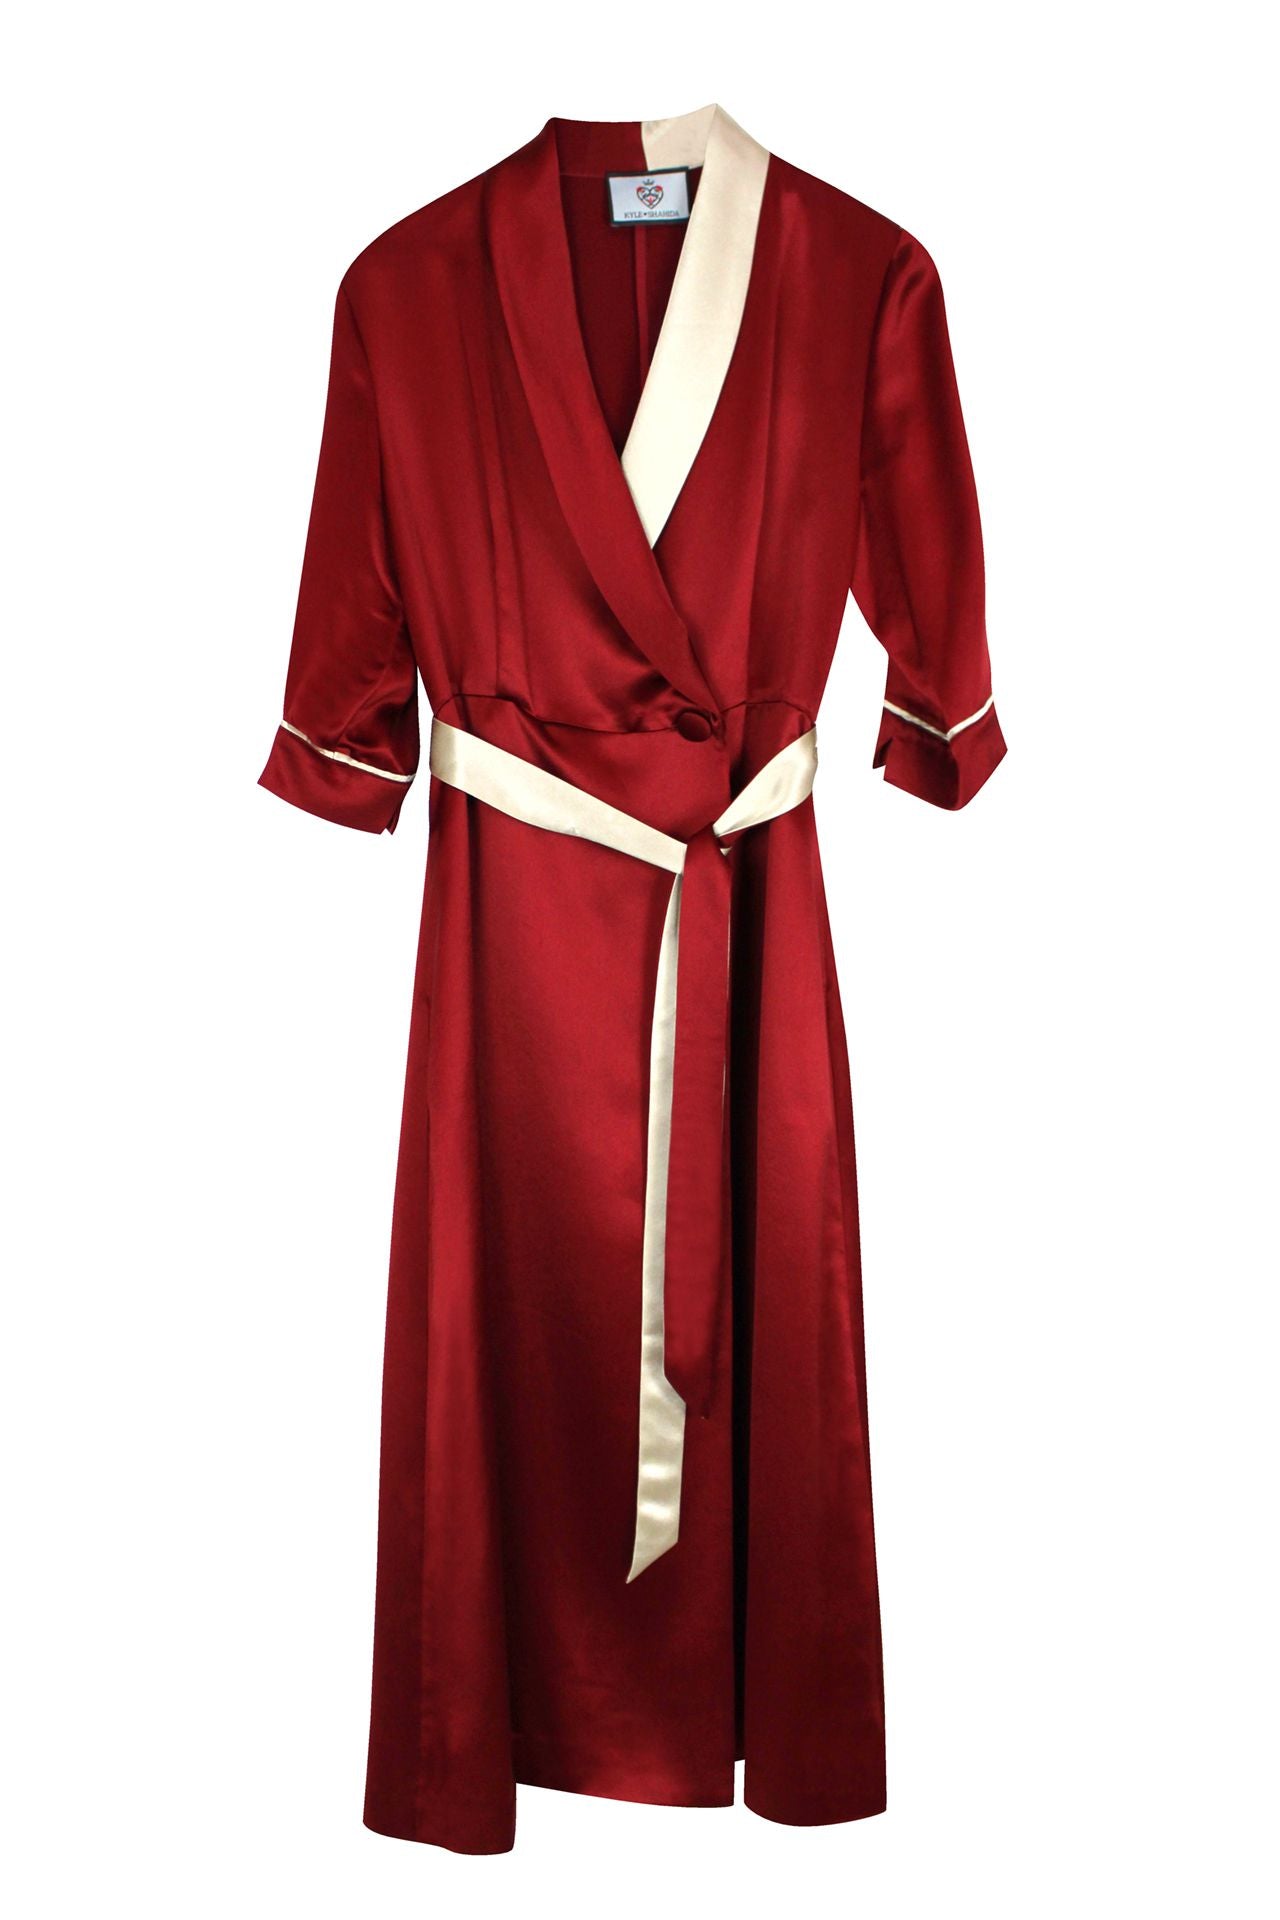 Silk-Belted-Robe-Dress-In-Red-By-Kyle-Richard